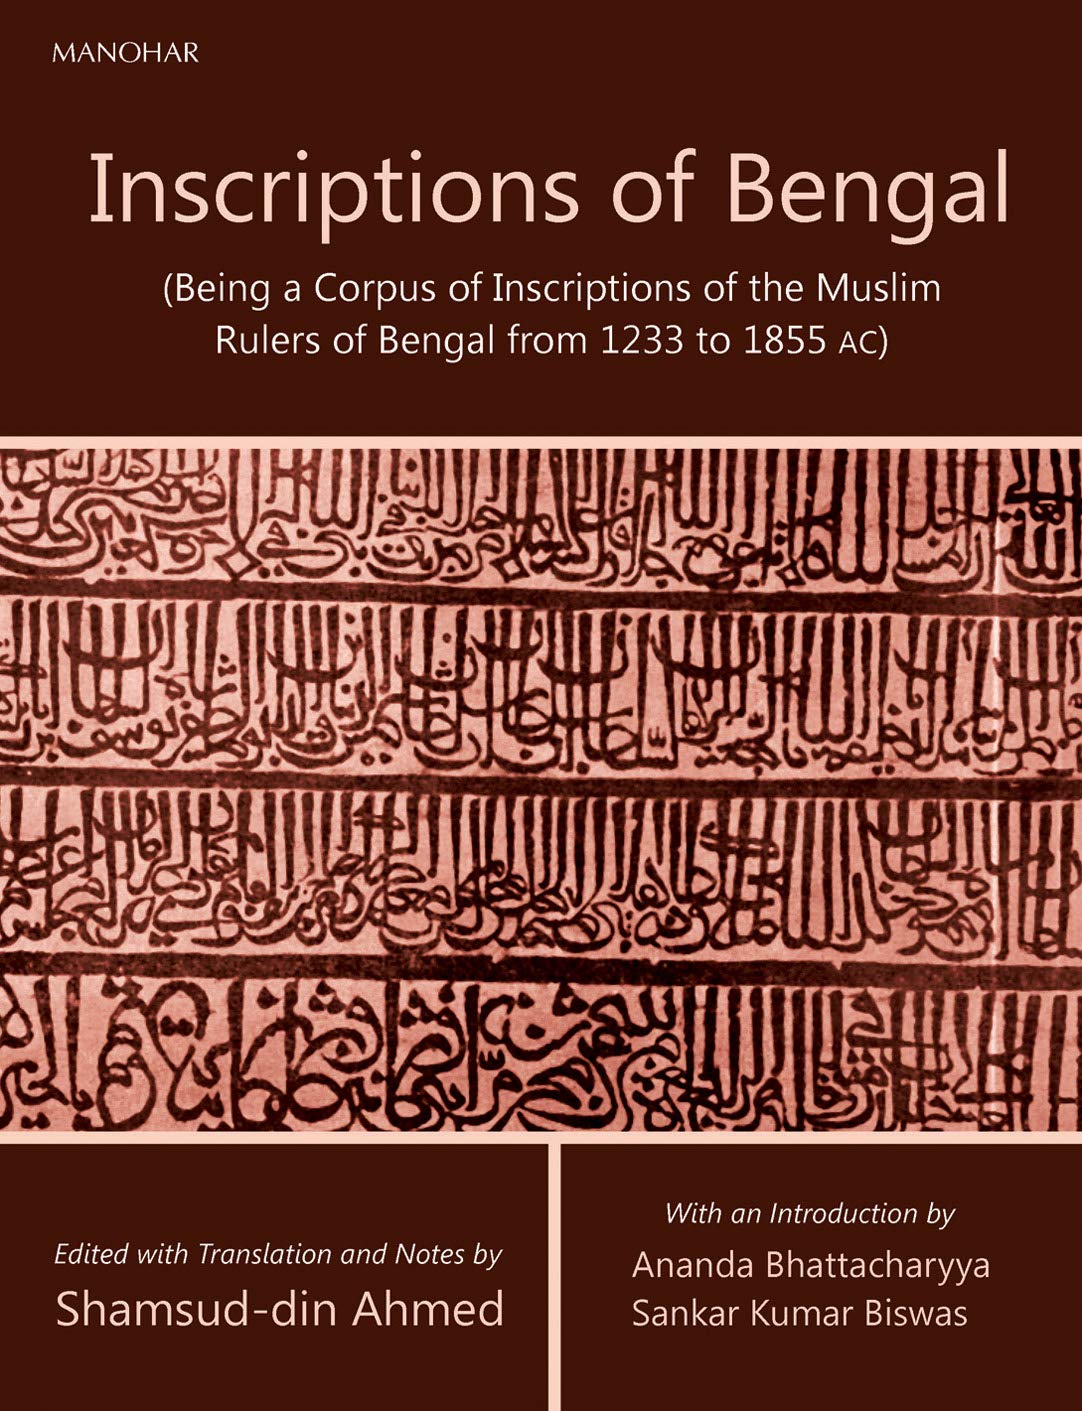 Inscriptions of Bengal: (Being a Corpus of Inscriptions of the Muslim Rulers of Bengal from 1233 to 1855 AC)